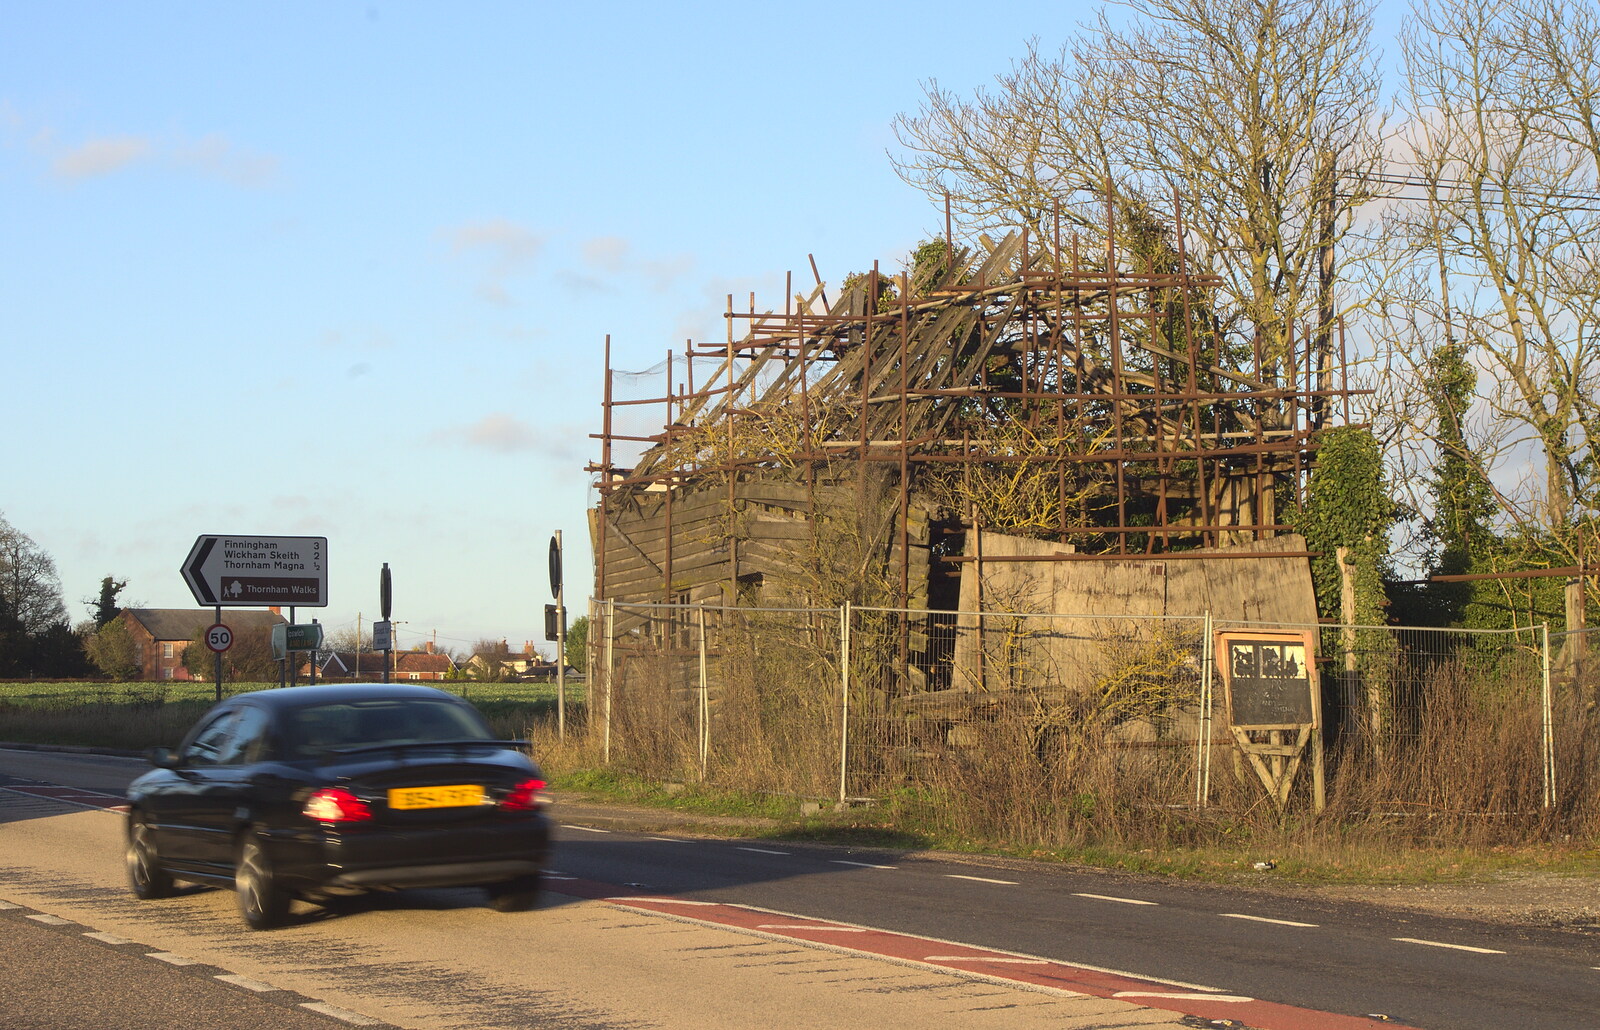 A car drives past the wrecked building from New Year's Day and Lunch at the White Horse, Ipswich, Finningham and Brome - 1st January 2013